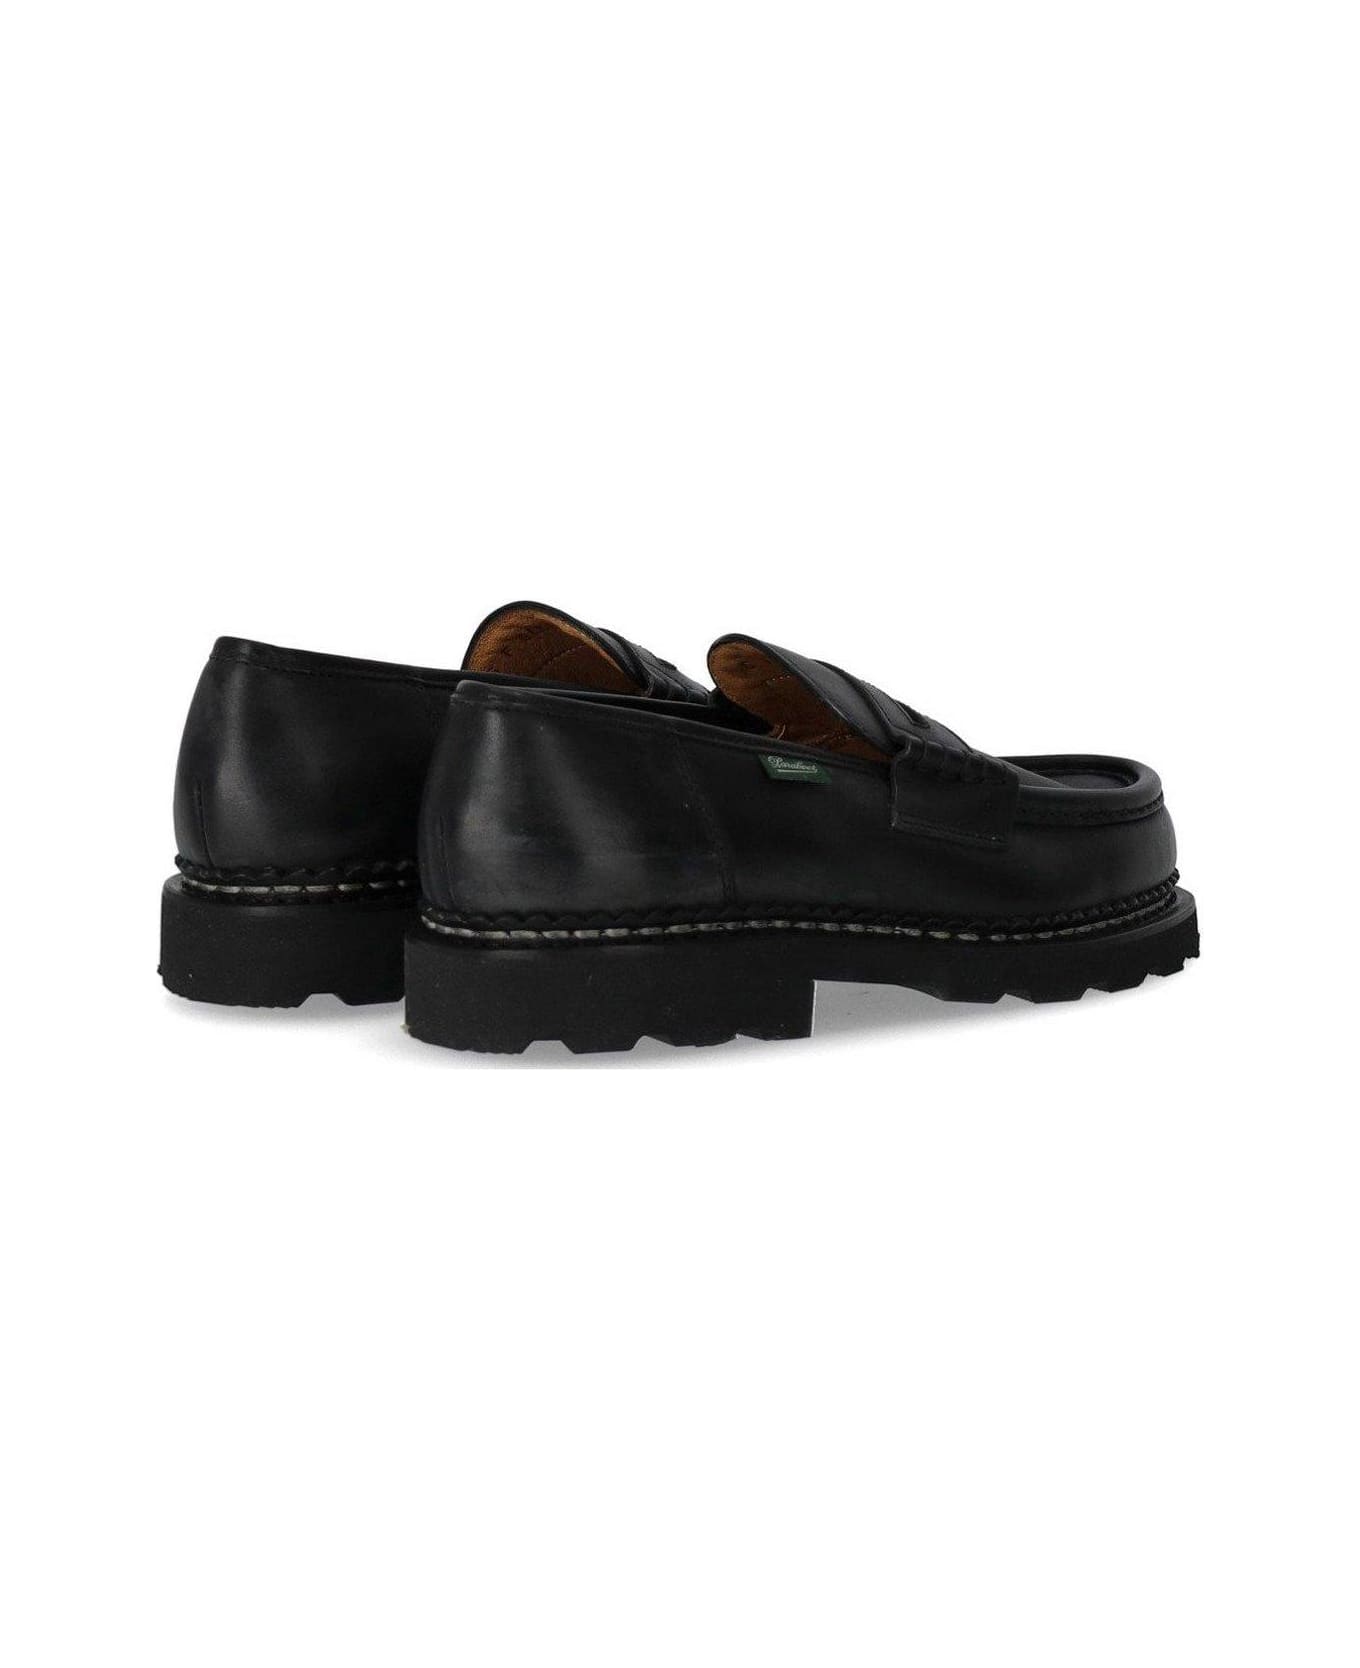 Paraboot Reims Marche Slip-on Loafers - Nero ローファー＆デッキシューズ